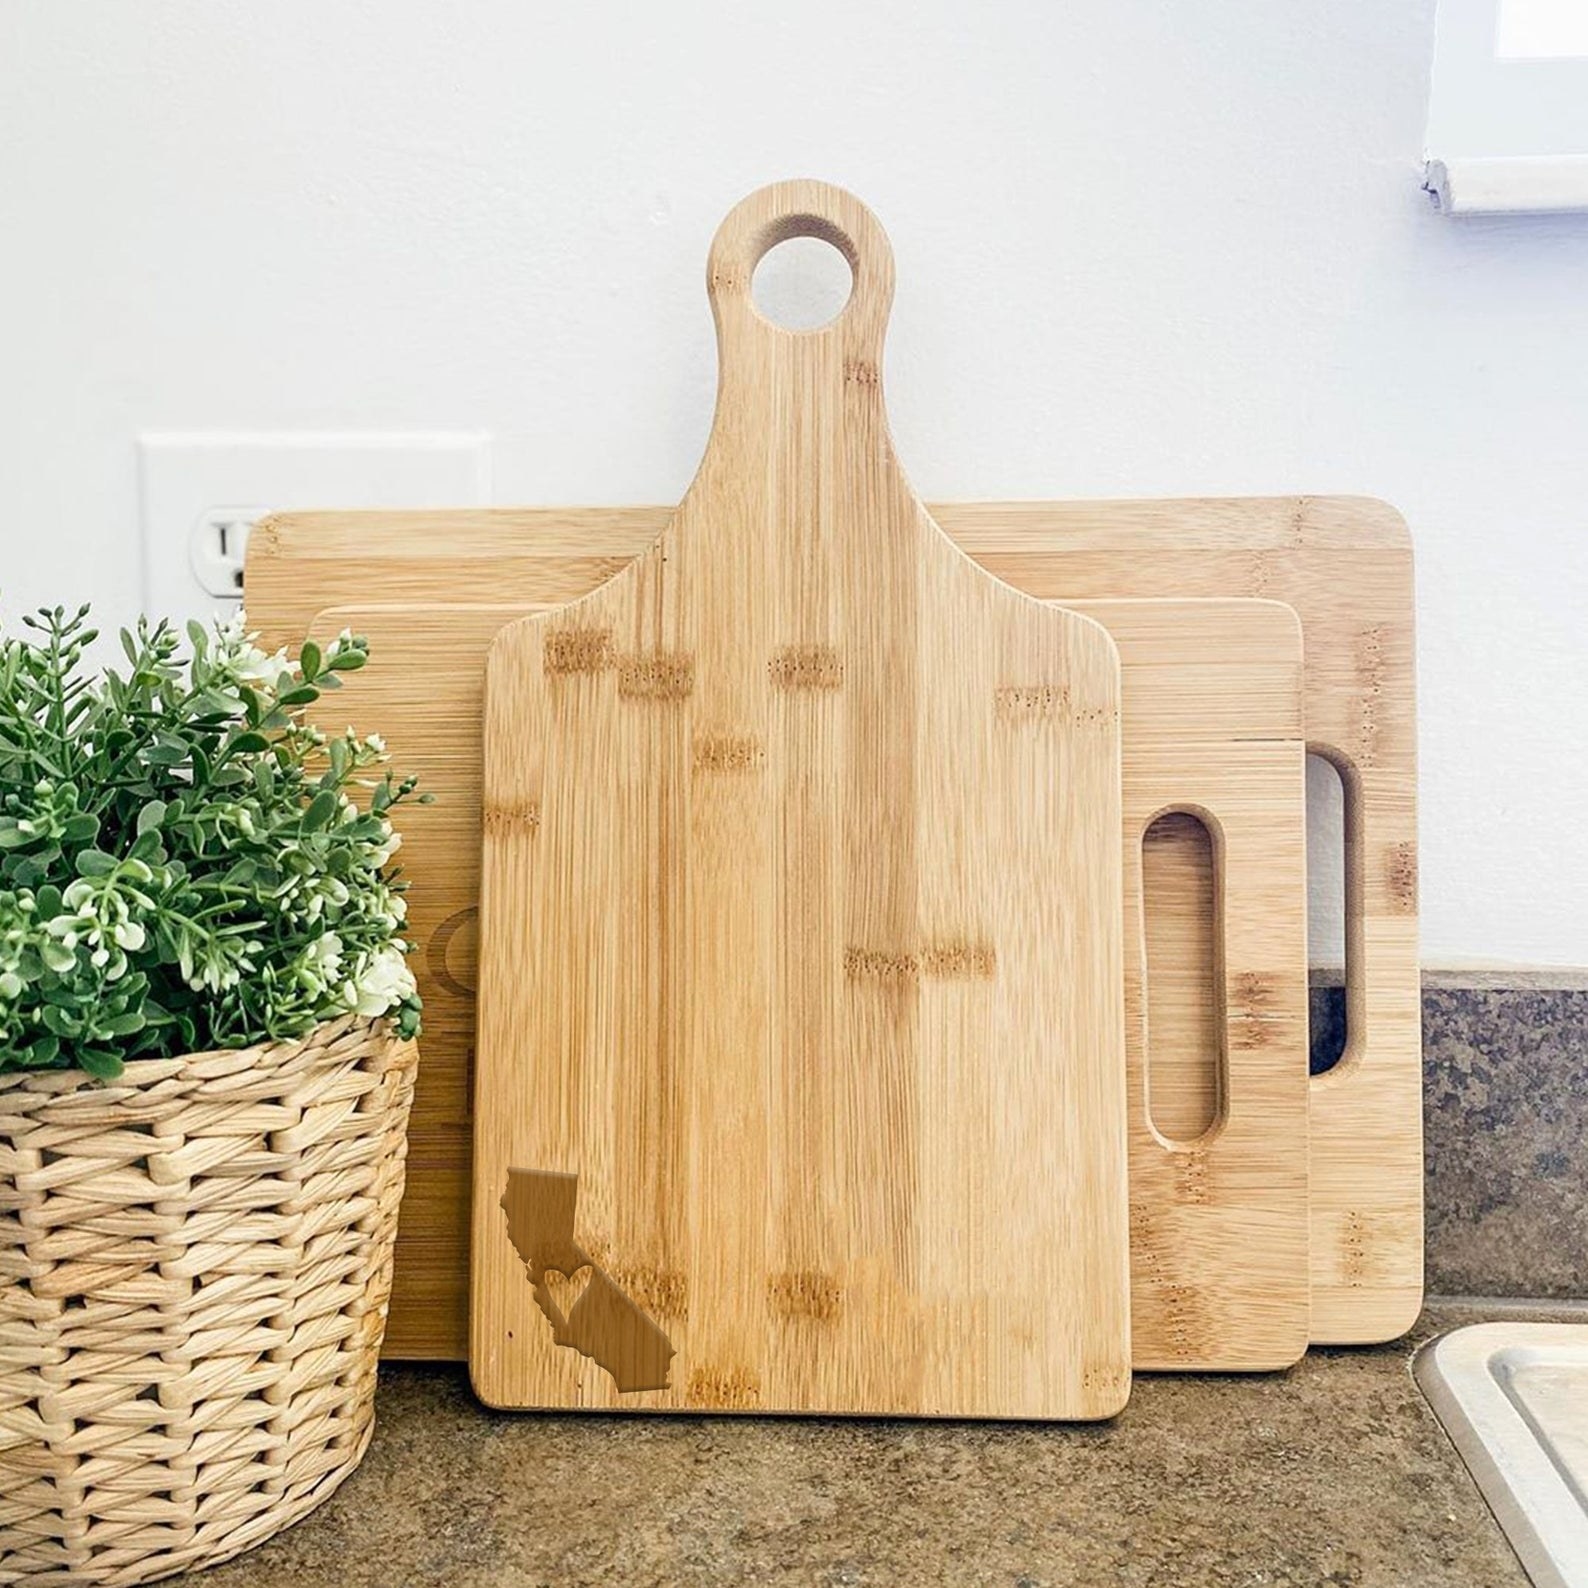 The paddle cutting board with a California silhouette in the corner